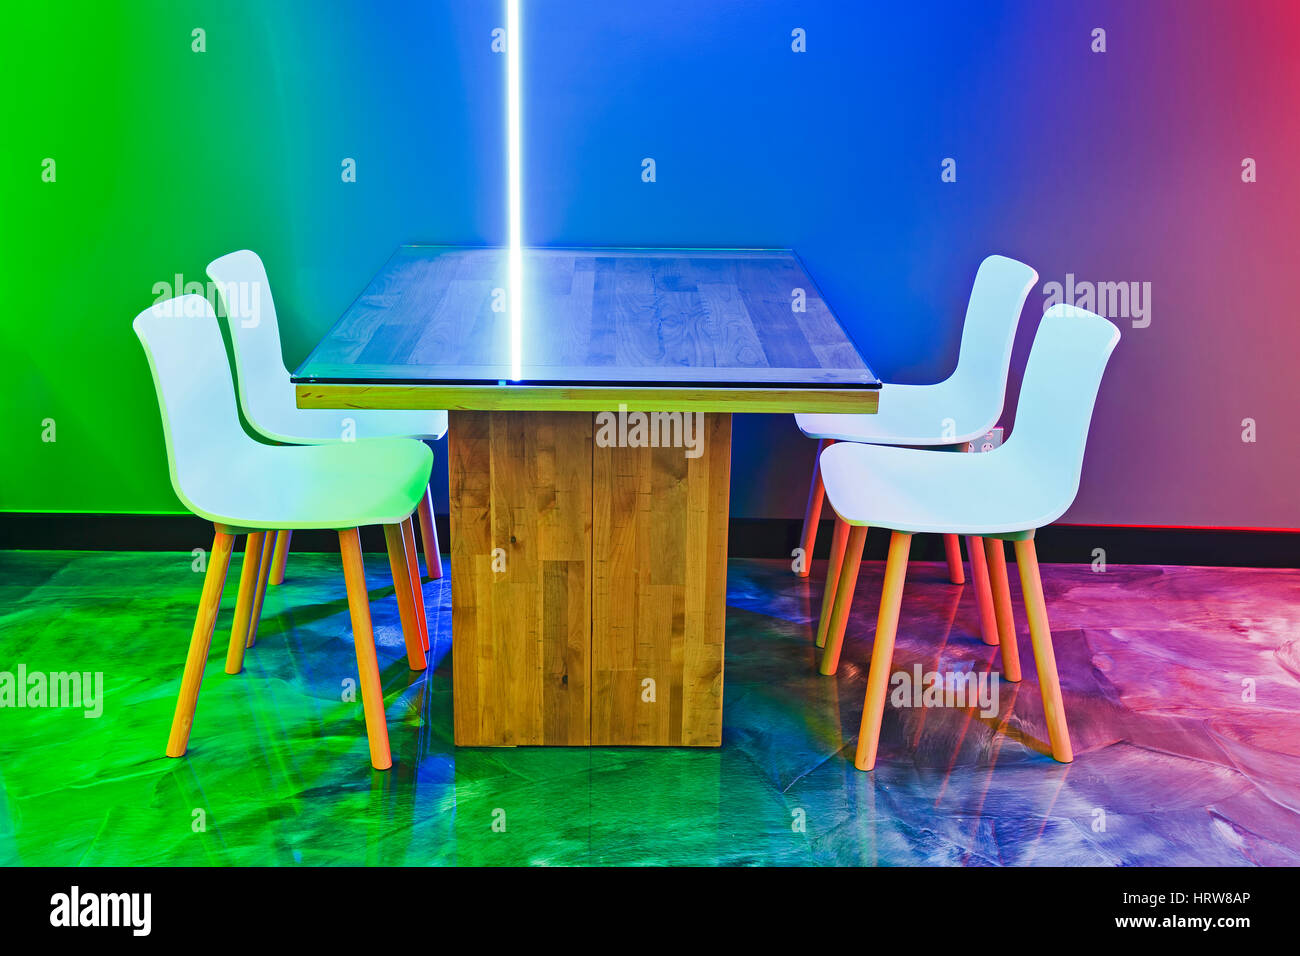 Multi colour light illumination at modern cafeteria with empty clean table and chairs waiting for customers on a reflecting floor. Stock Photo